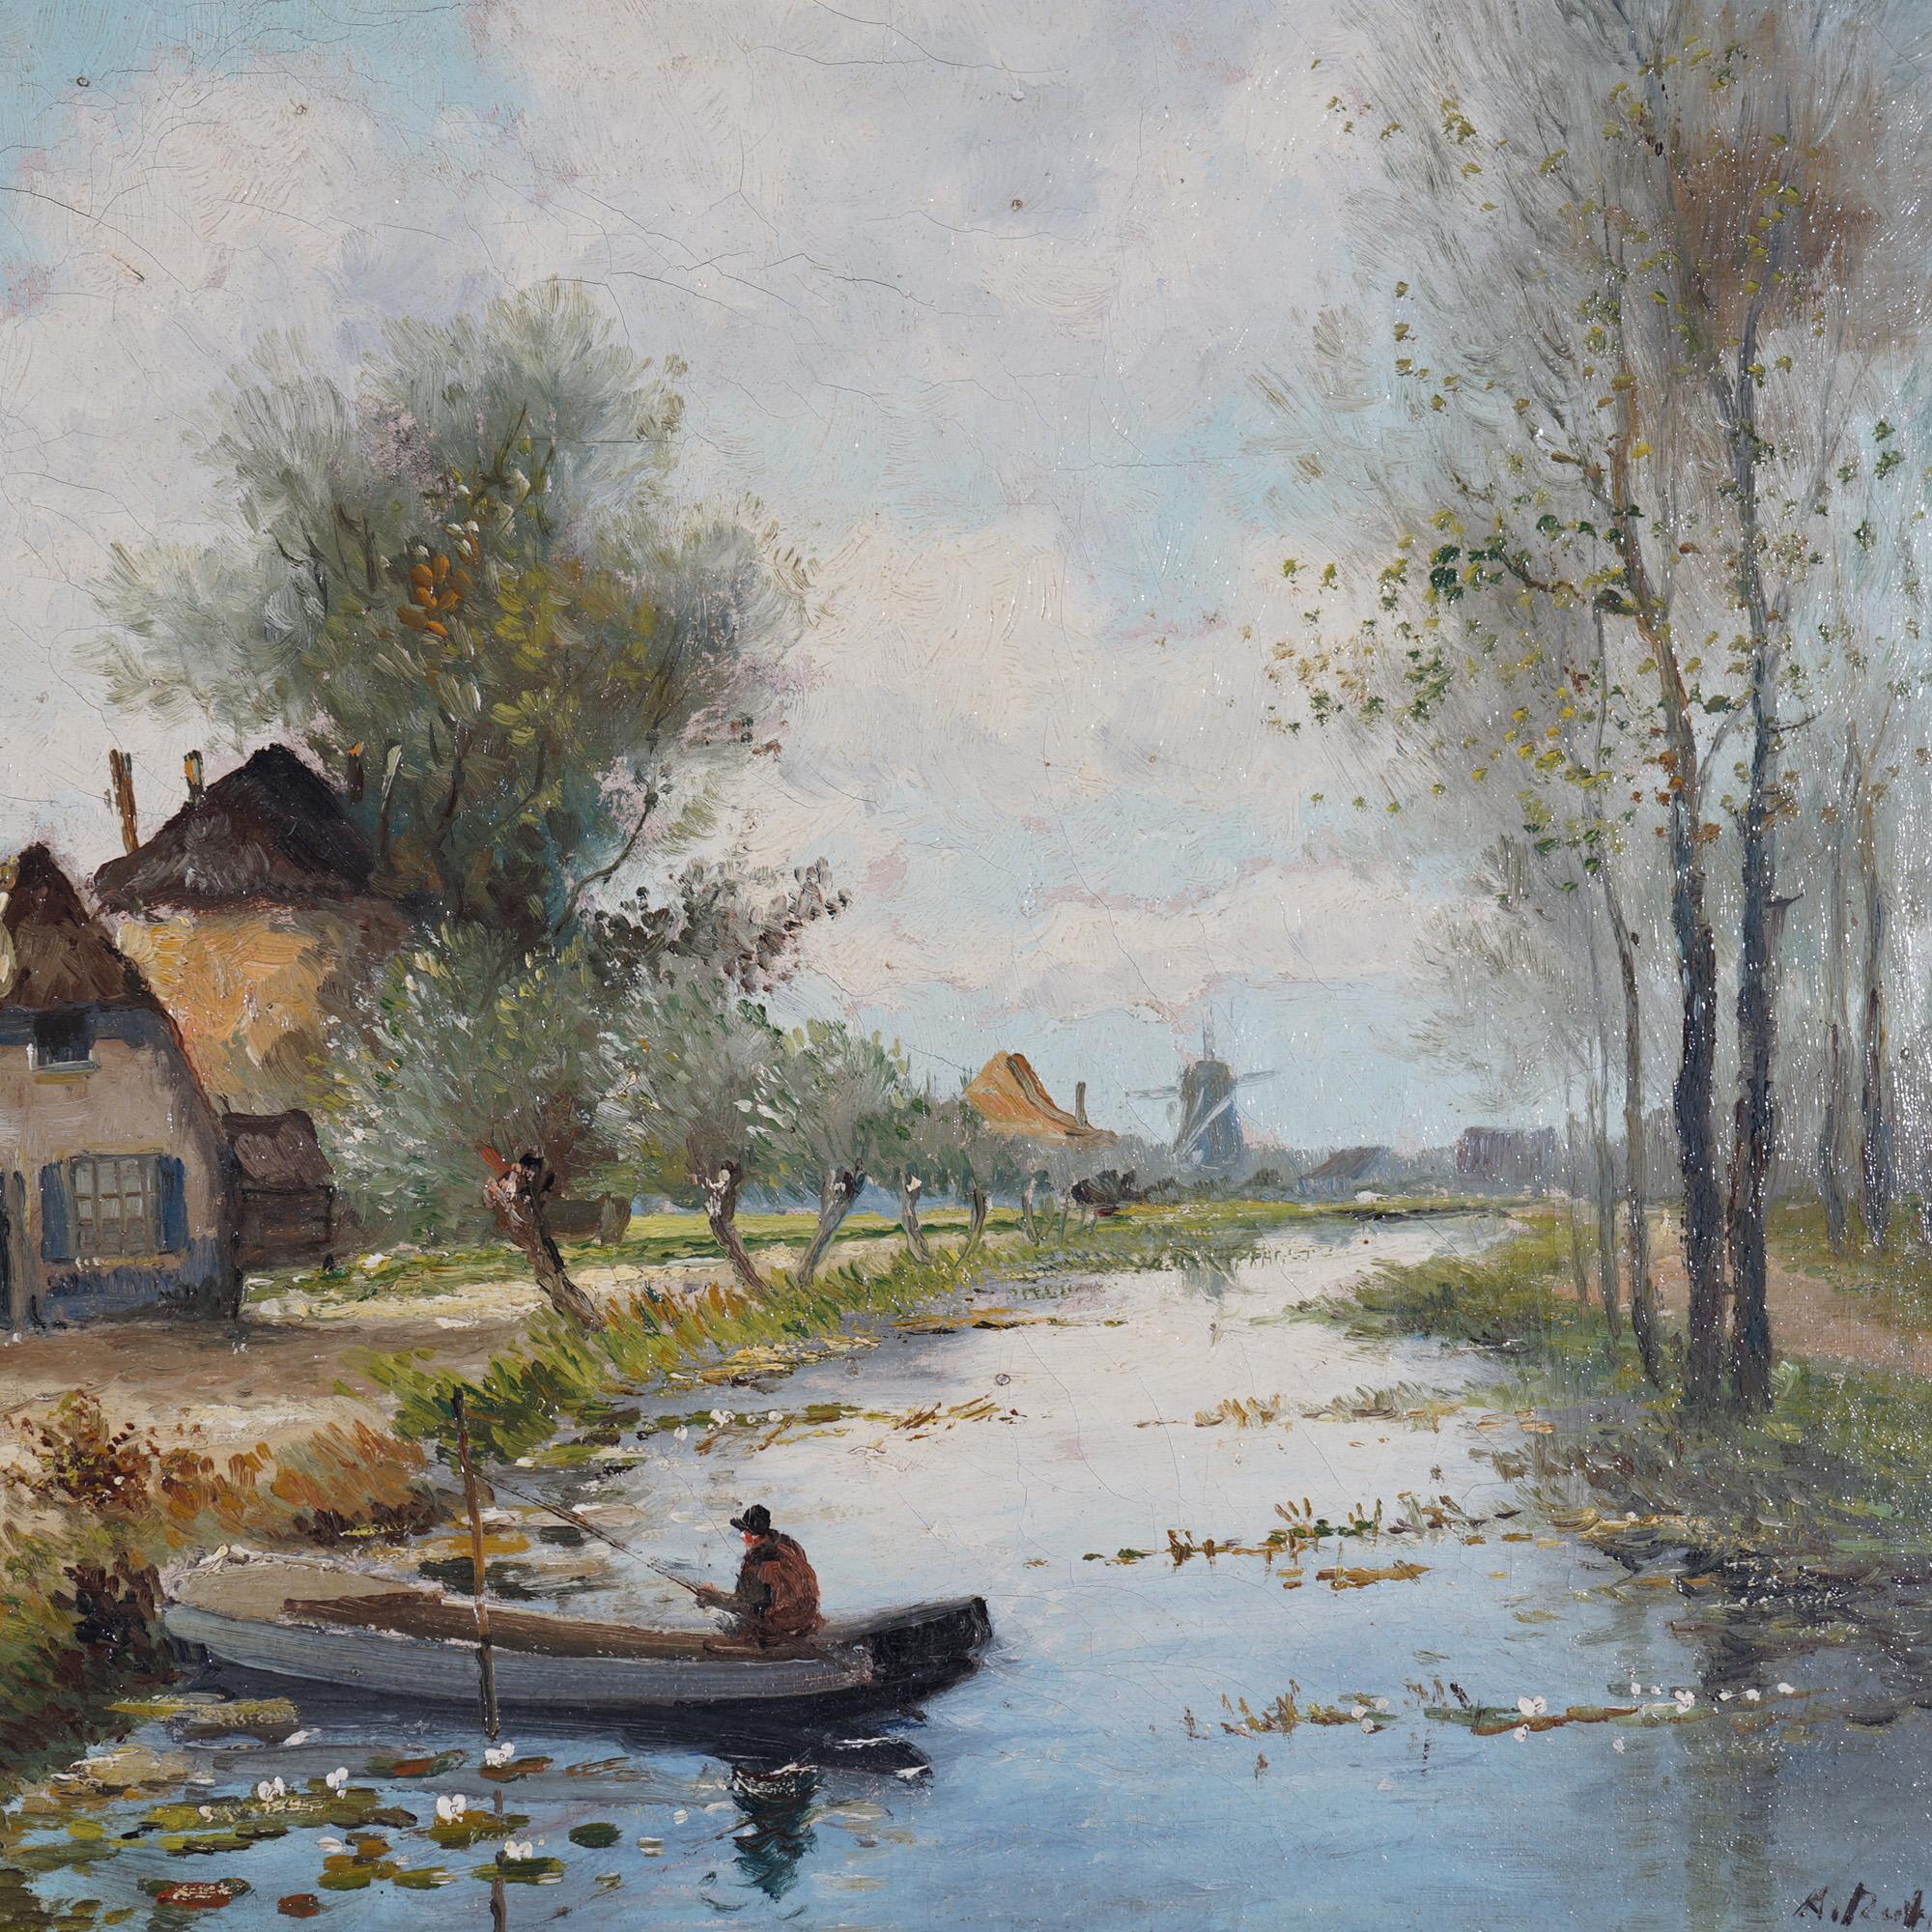 An antique painting by Rutgers offers oil on canvas Dutch landscape scene with structures, fisherman in boat and windmill, artist signed, 20th century

Measures - 20